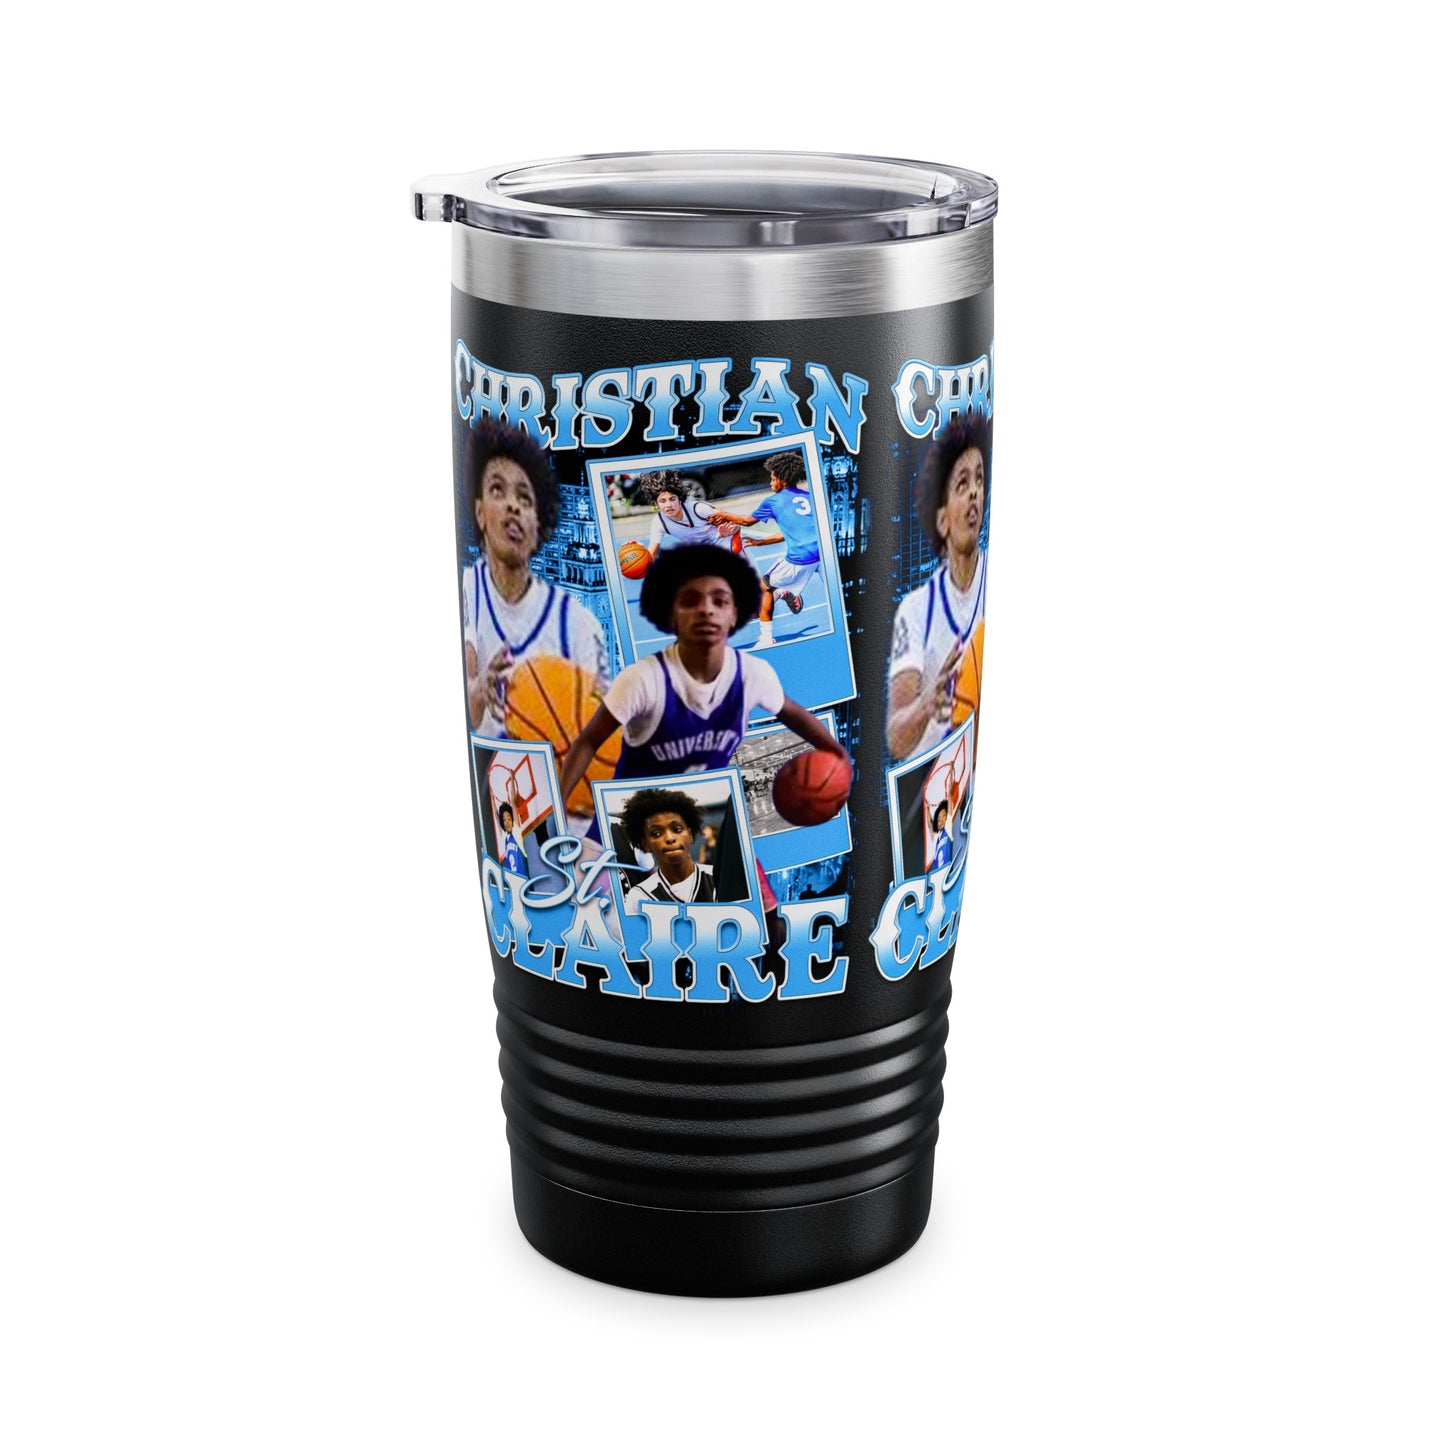 Christian St. Claire Stainless Steal Tumbler